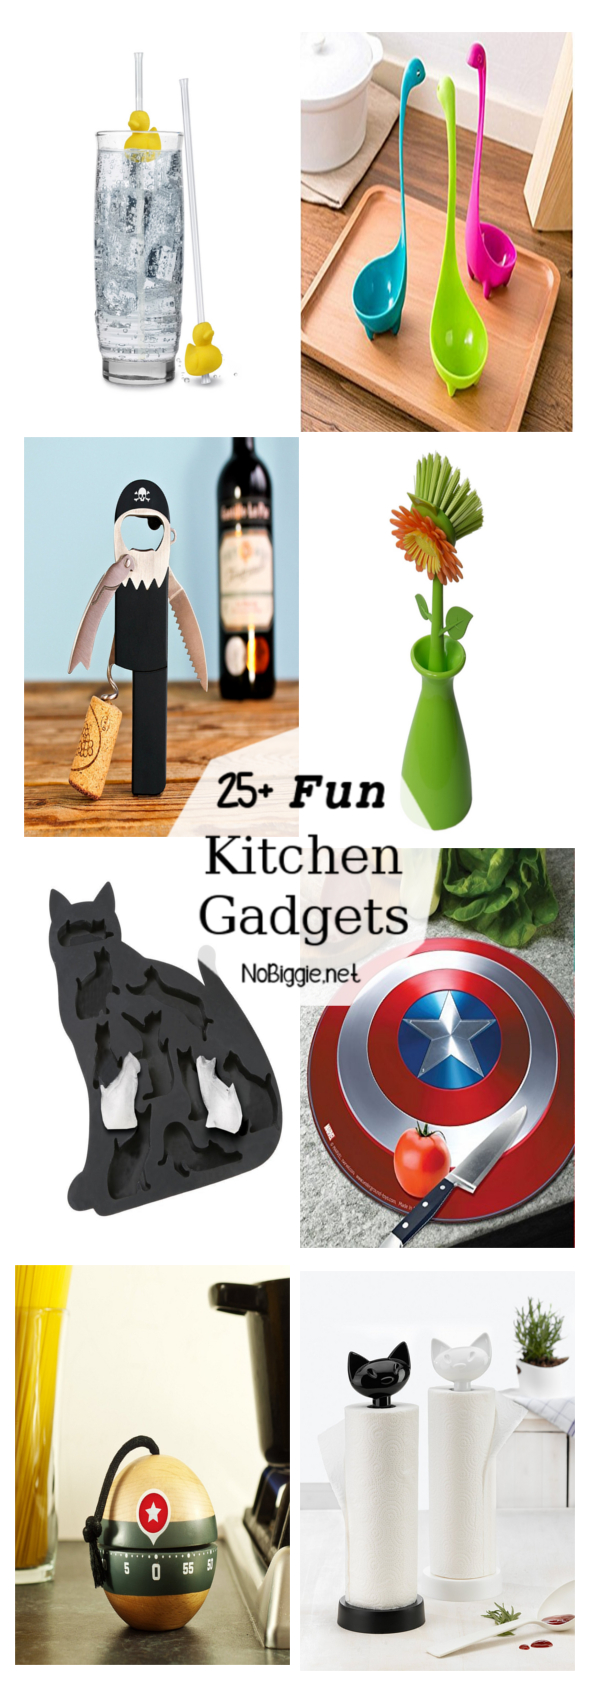 Quirky kitchen gadgets - useful and the not so useful